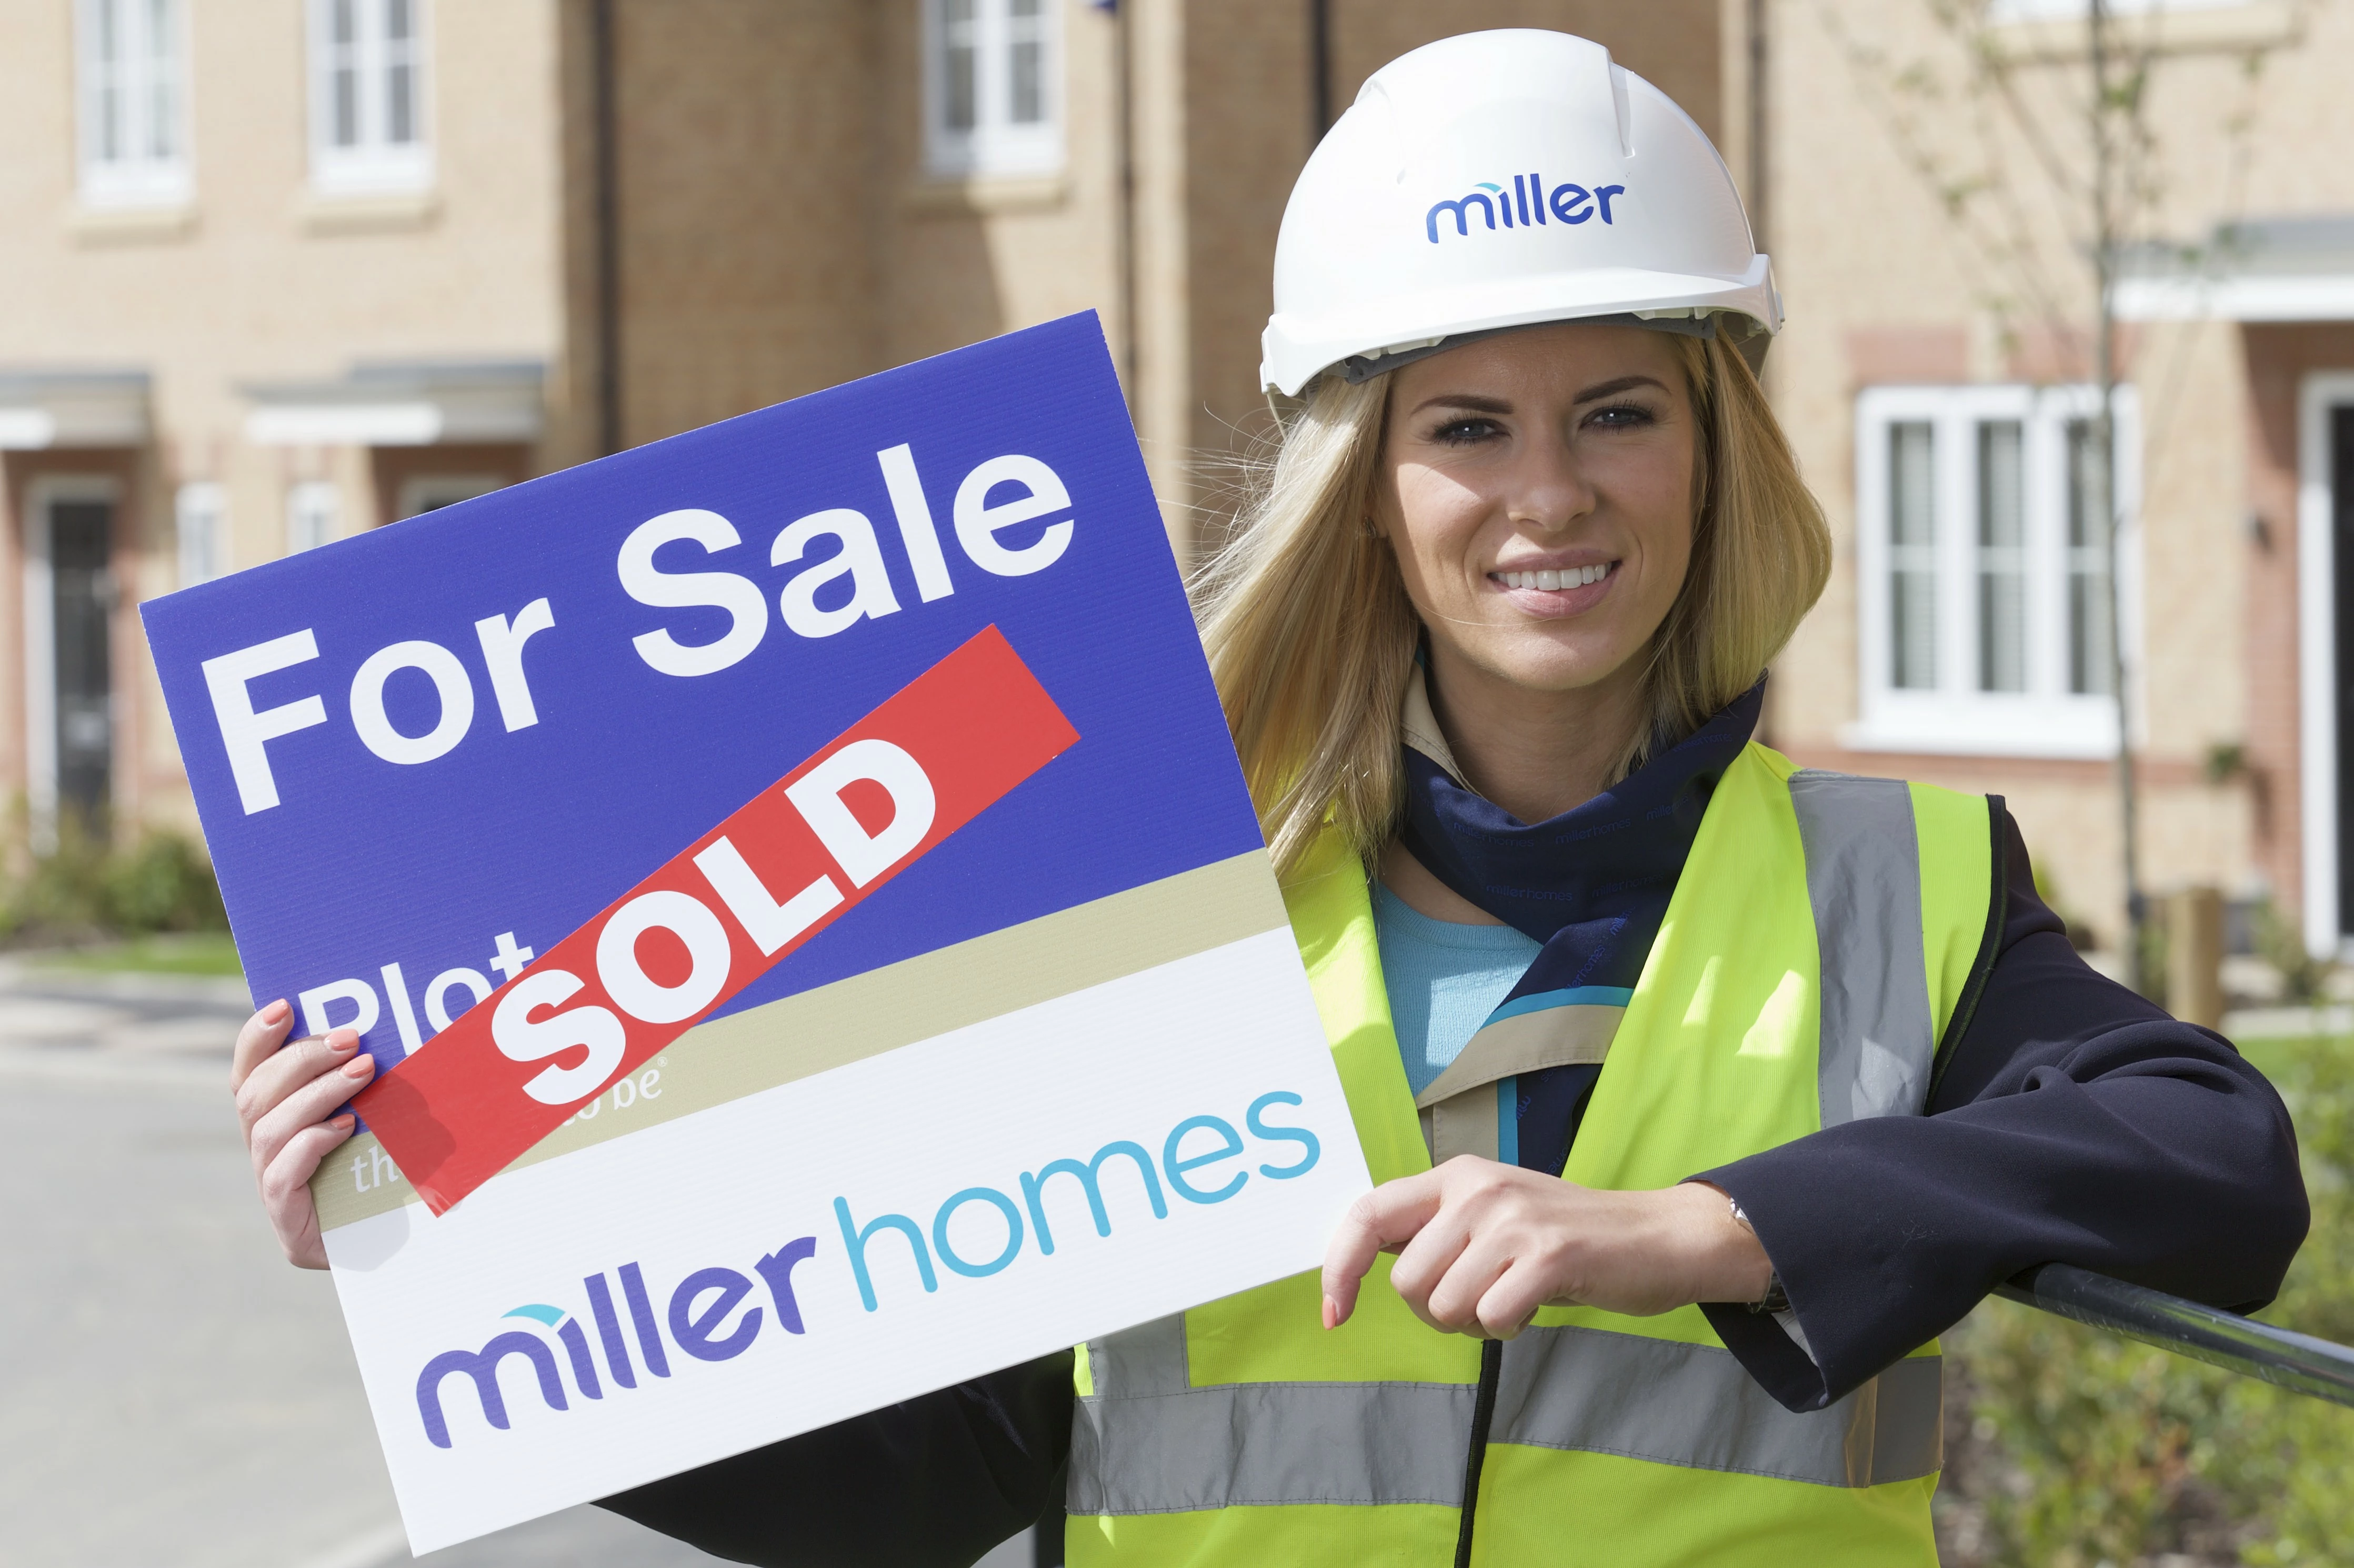 Miller Homes Midlands is on track to meet its ambitious target of bringing 677 new homes to the region by the end of the year.